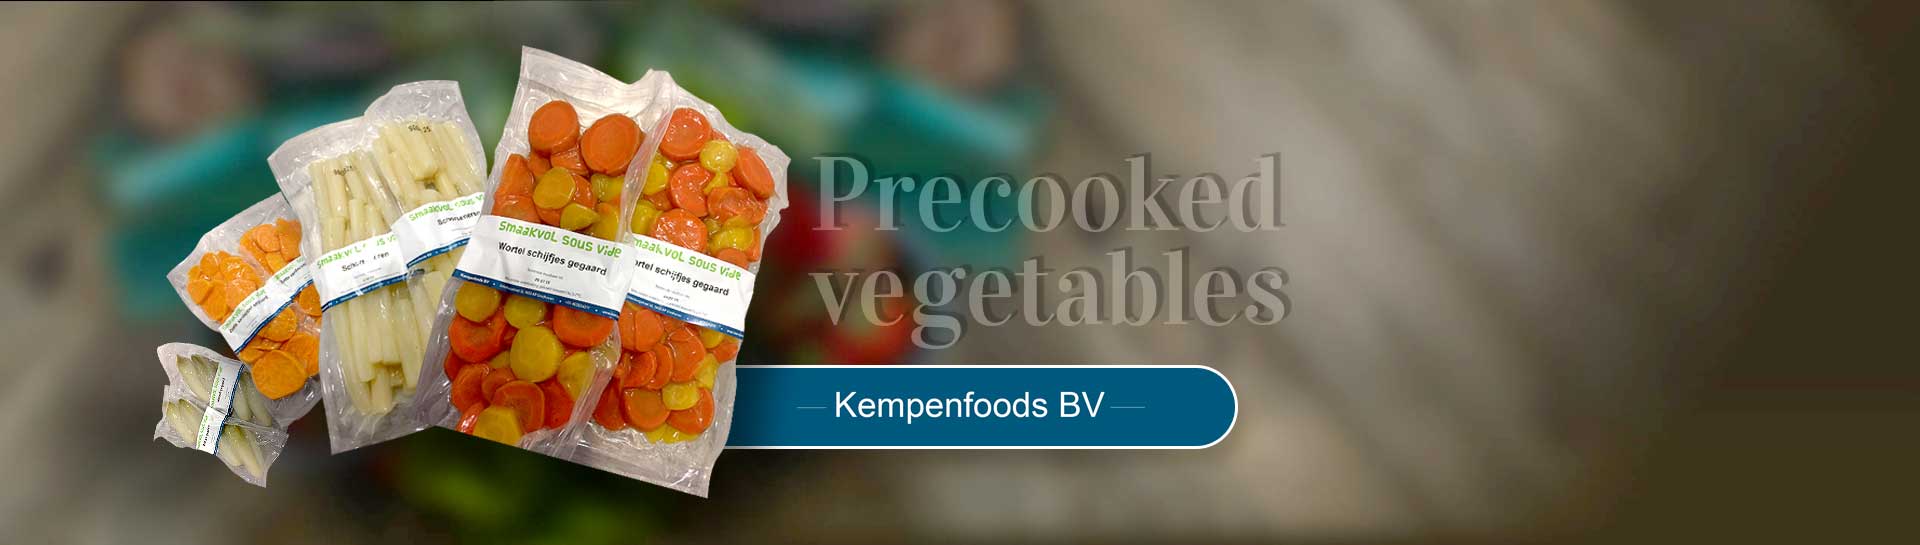 Kempenfoods bv - Precooked vegetables